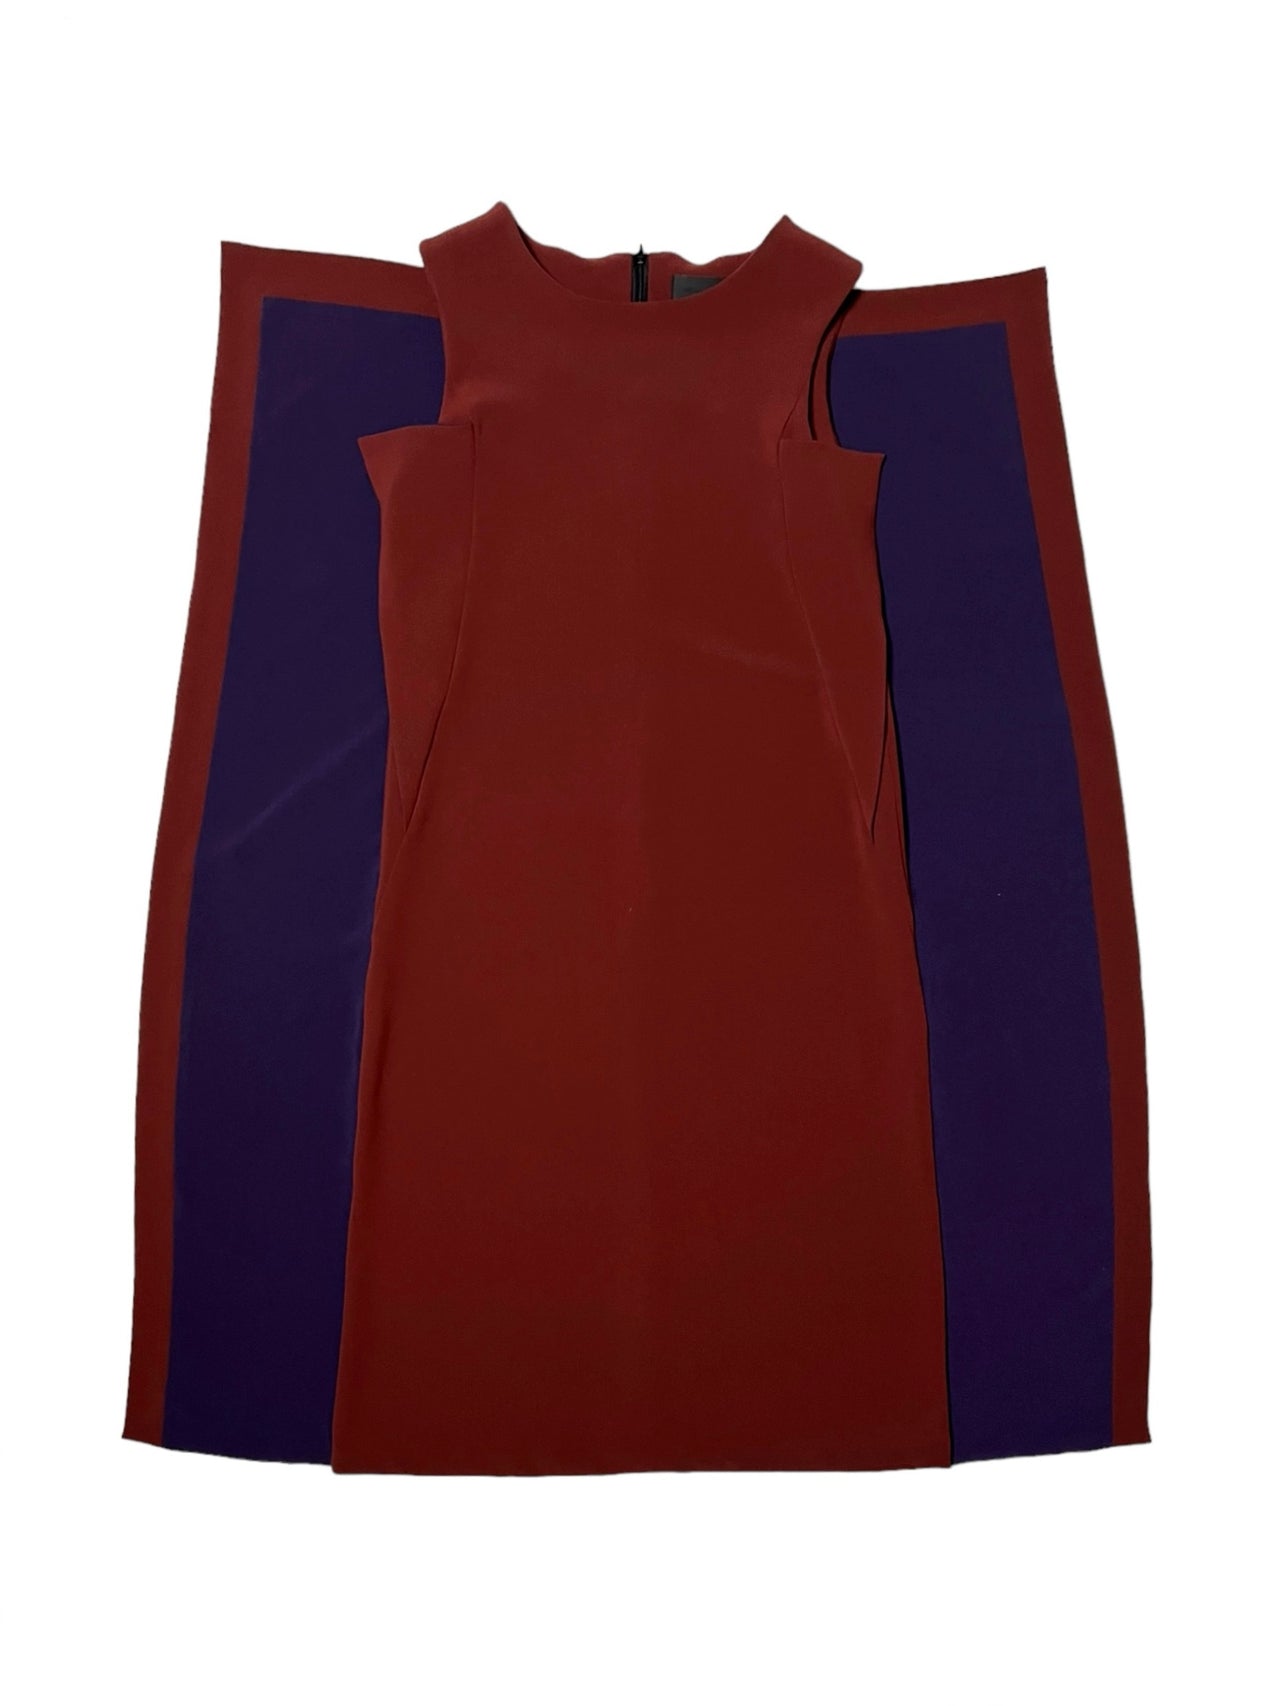 TURINA / FLAG DRESS in BORDEAUX【PREORDER】